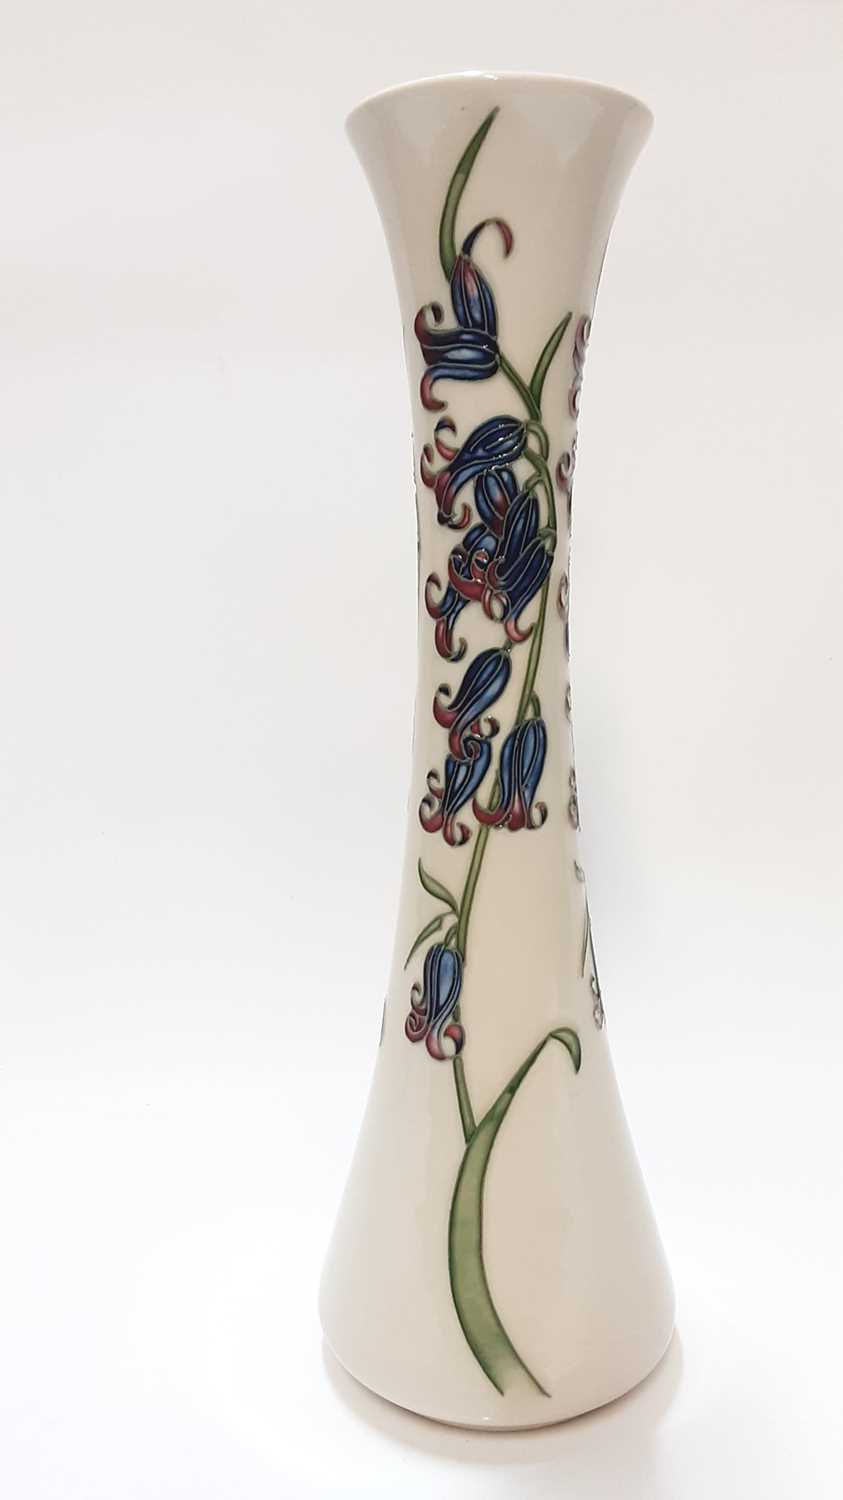 Lot 1176 - Moorcroft pottery vase decorated in the Bluebell Harmony pattern, dated 2009, 31cm high